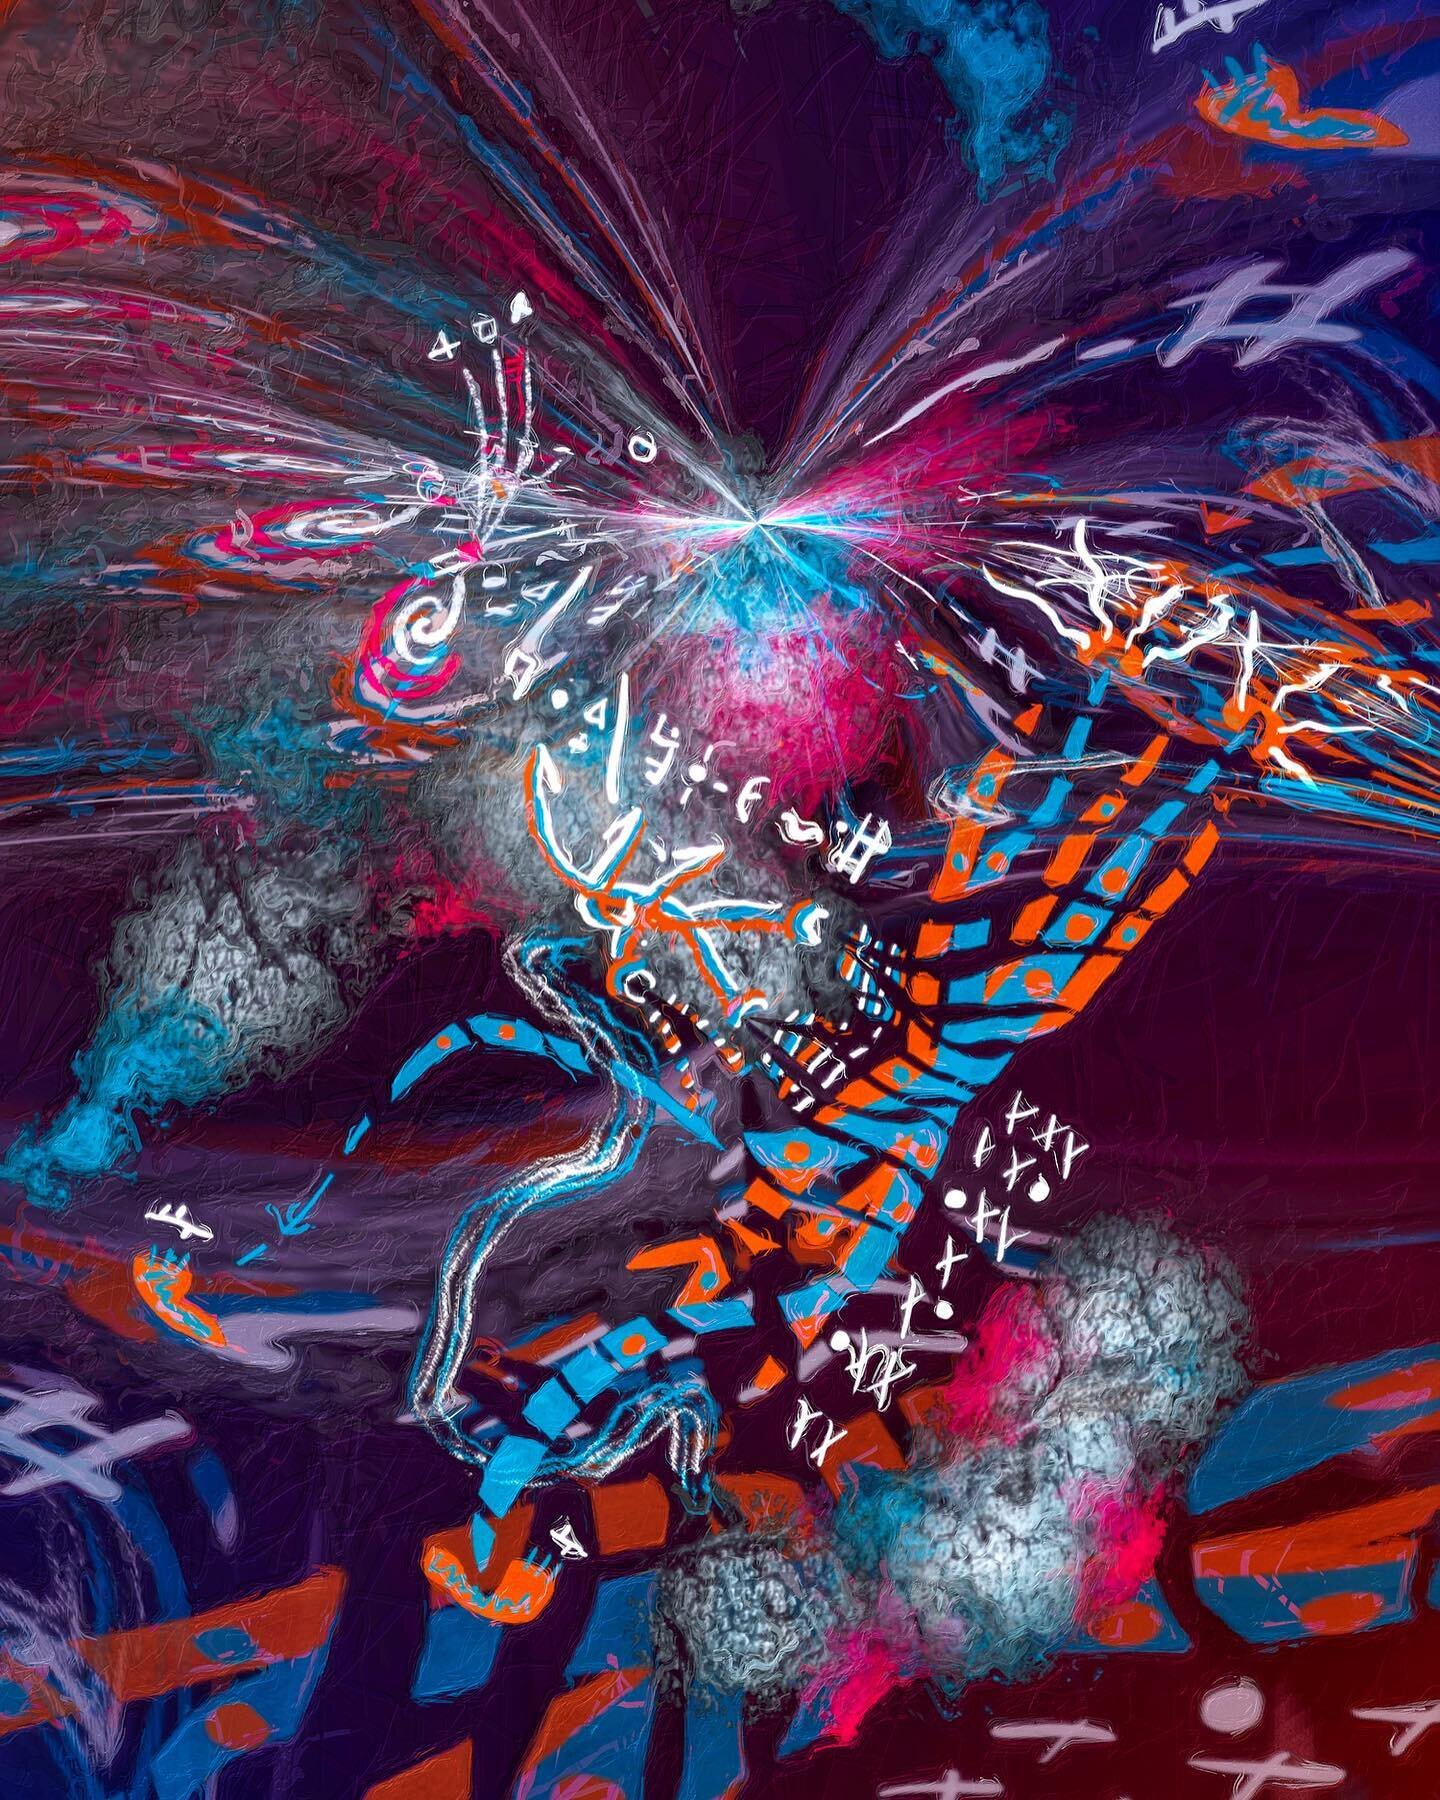 &ldquo;Kachina Spaceman&quot; 
#Digital #painting source created first, then manipulated with #fractal algorithms. #artworks #abstract #abstractart

#Print available. Follow linktr.ee/skiphunt in bio to [Order Skip Hunt Prints] &copy; 2019 Skip Hunt